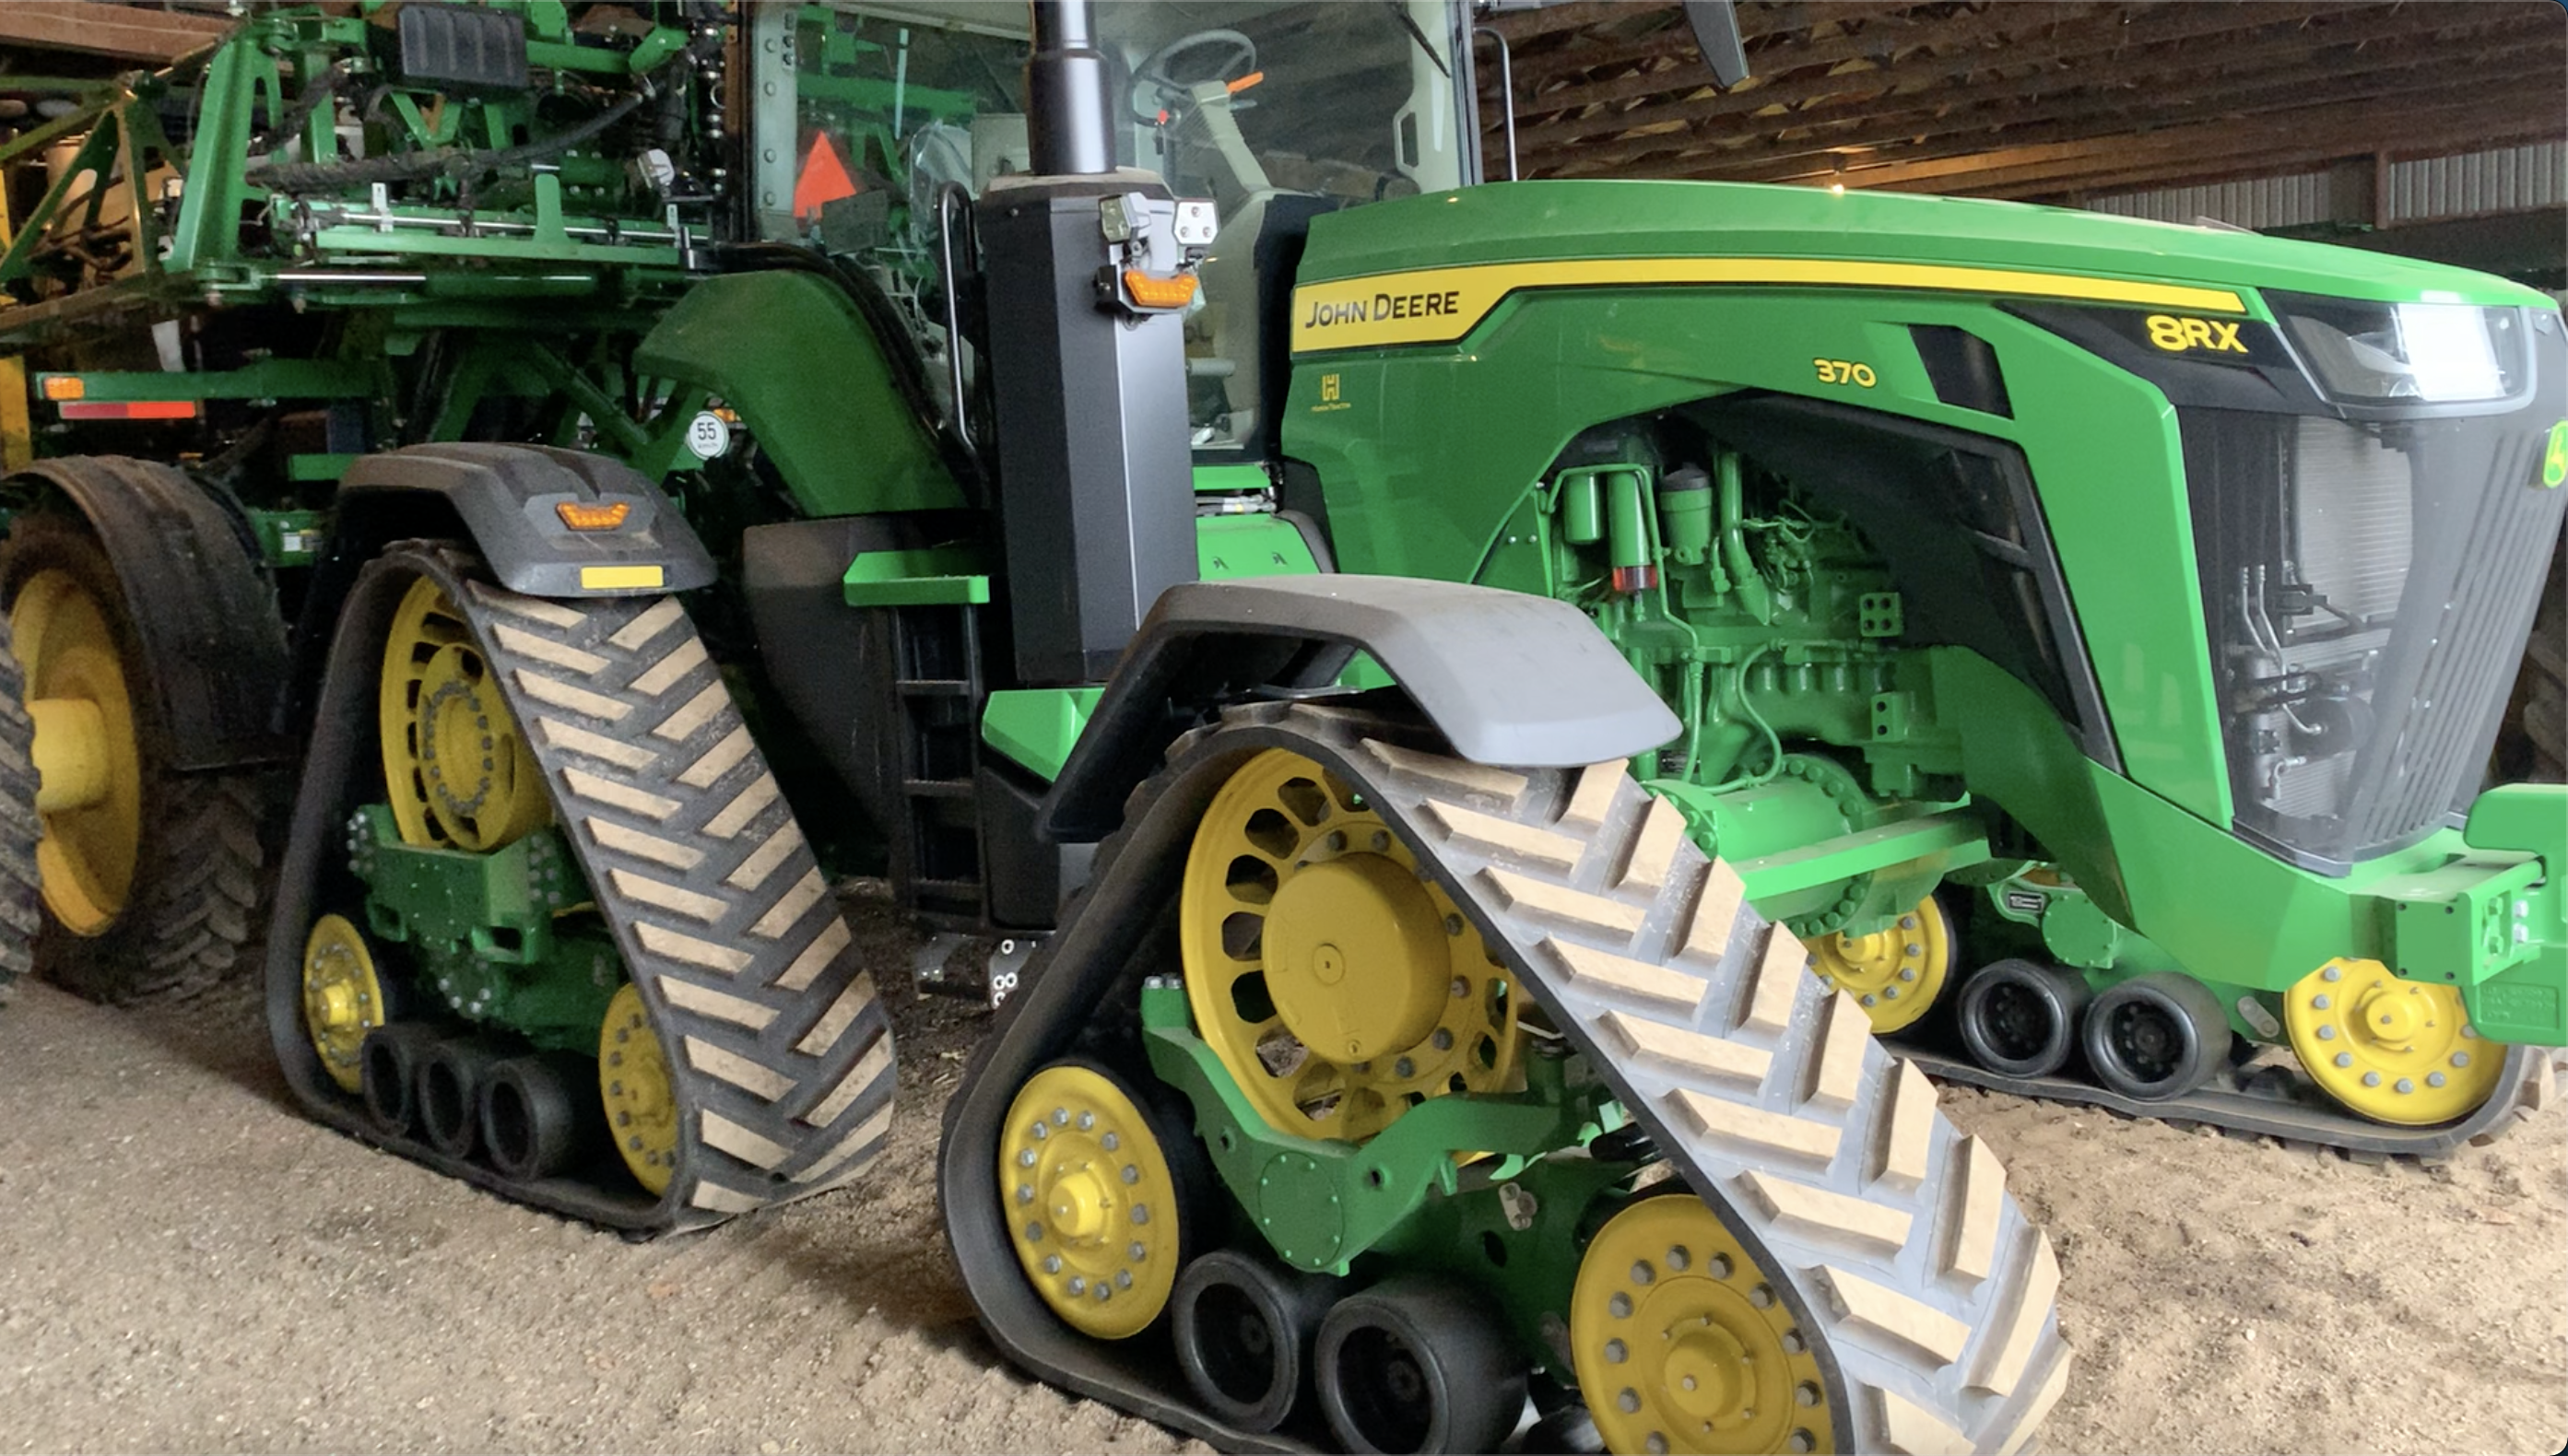 Featured image for “Eliminating compaction while planting or harvesting is easy with the John Deere 8RX 370.”